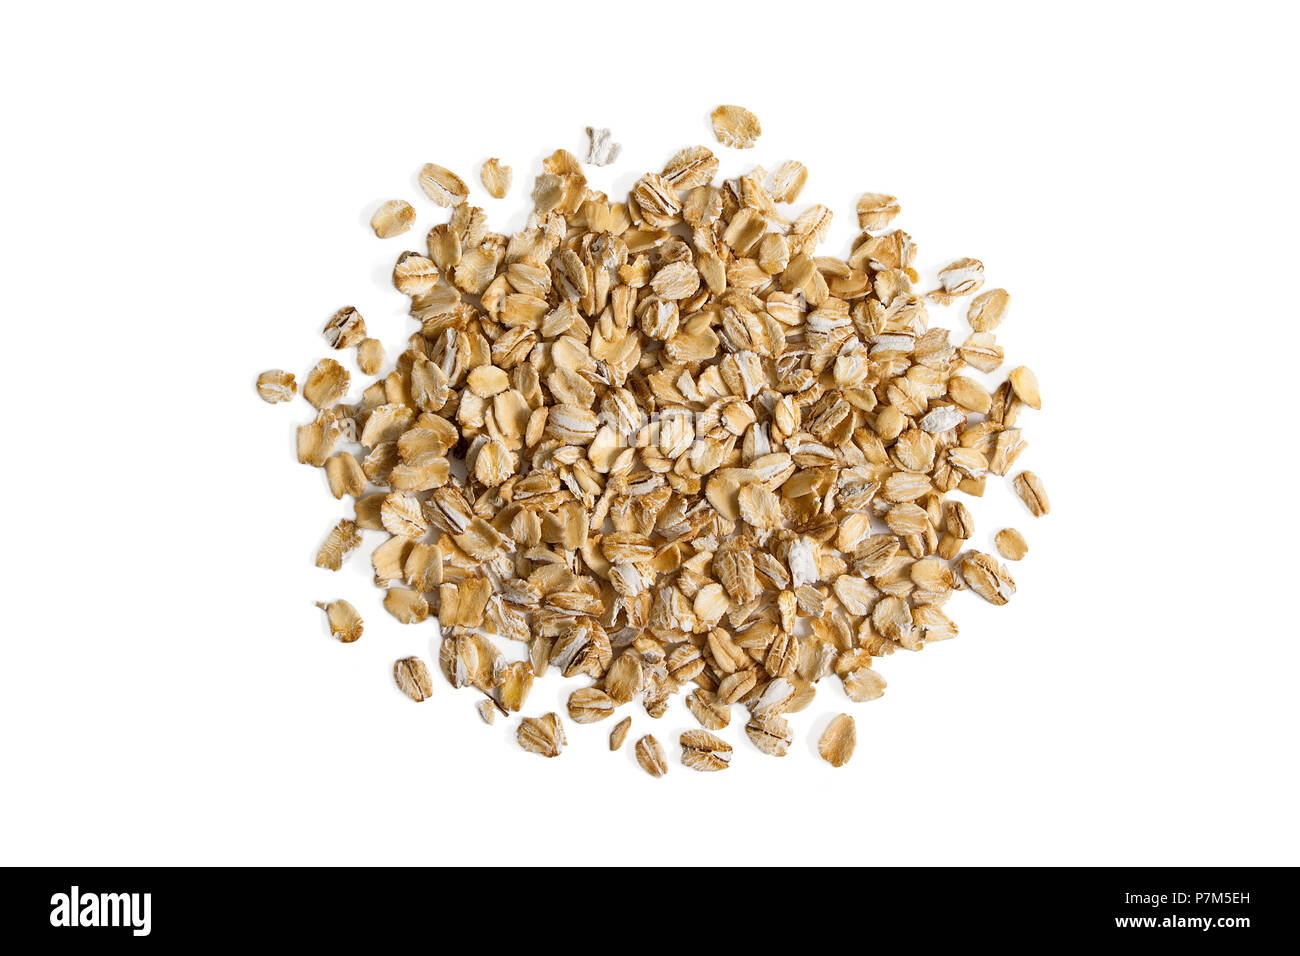 Pile of oats isolation on a white background from above. Stock Photo